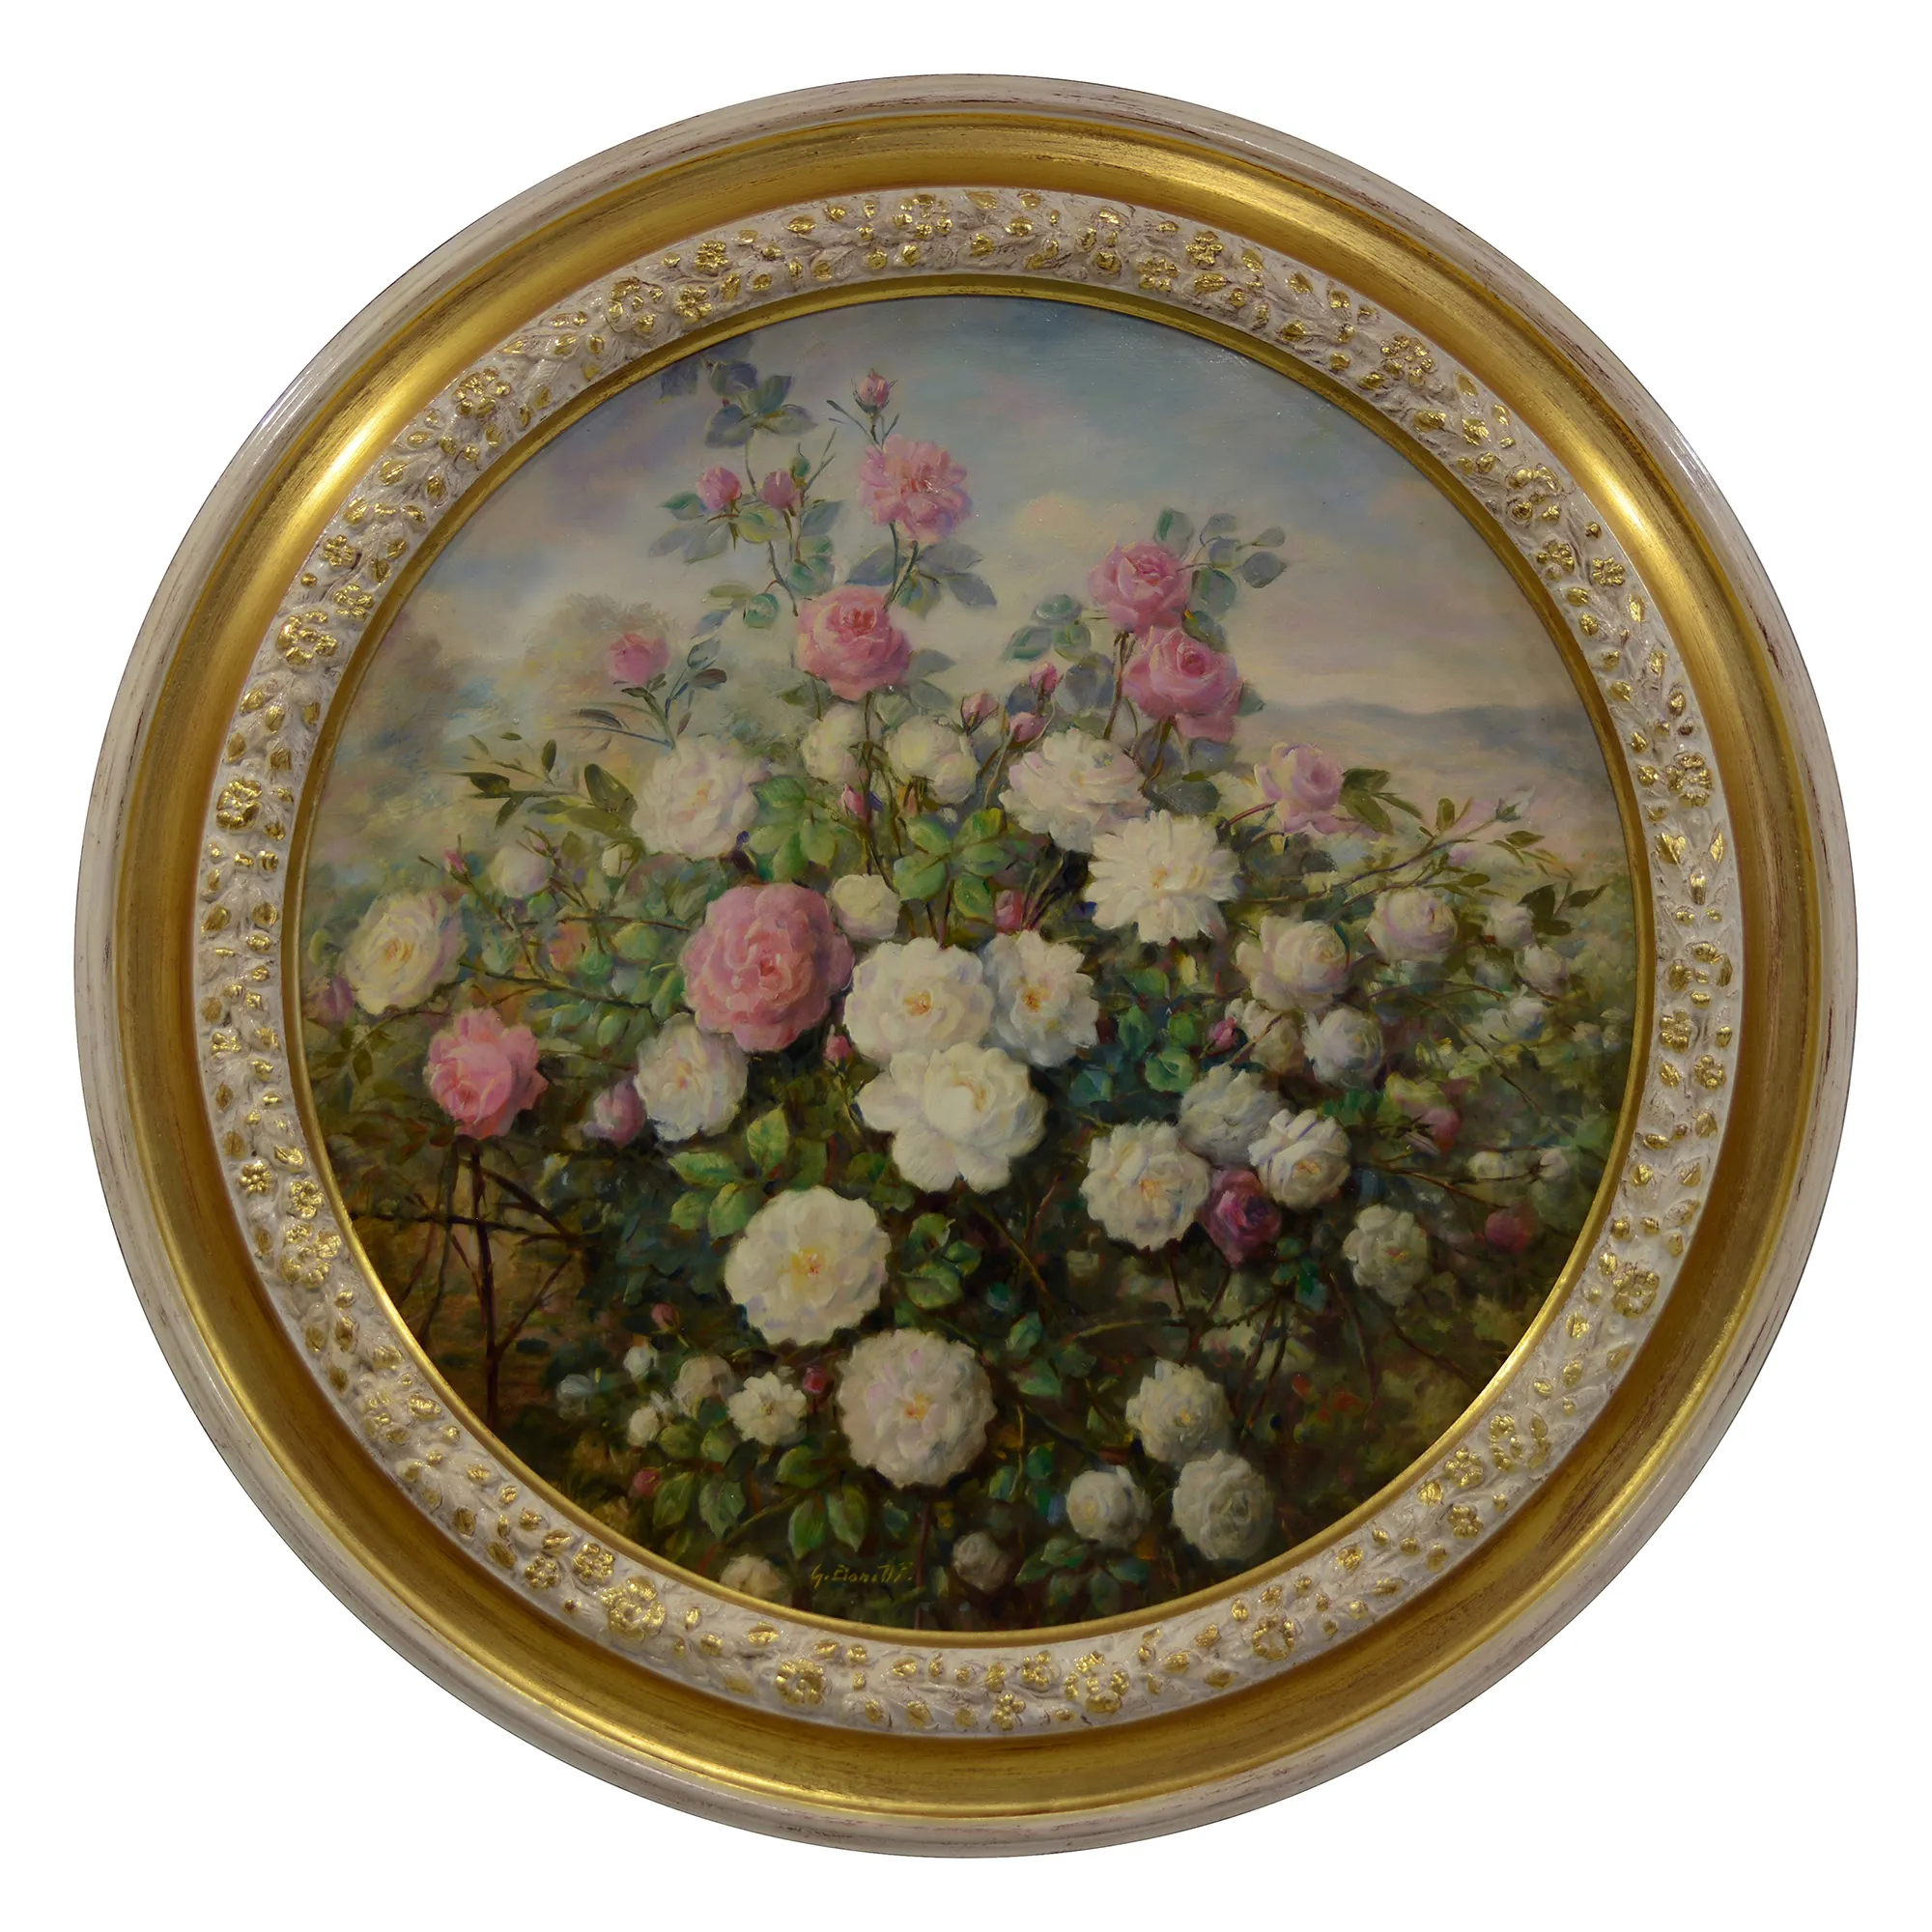 Handcraft Made in Italy oil on canvas classical art painting 'Rose garden' wall decor by Giovanni Bonetti